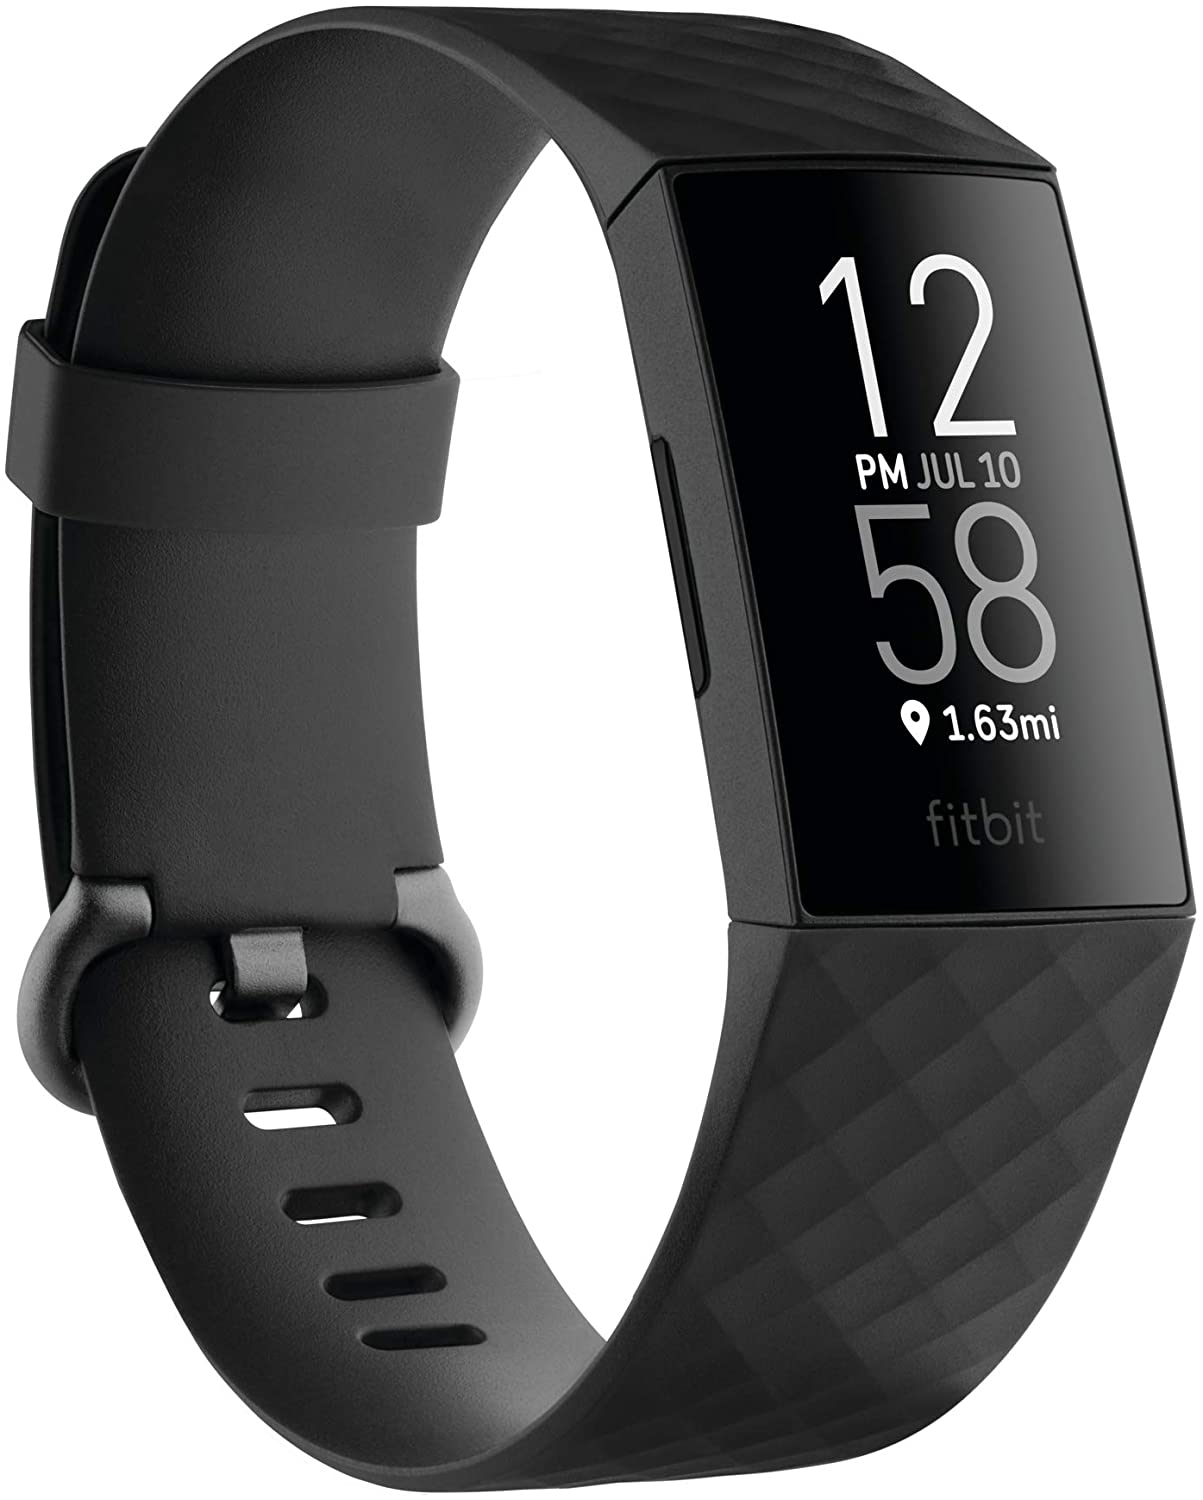 what is better fitbit or garmin